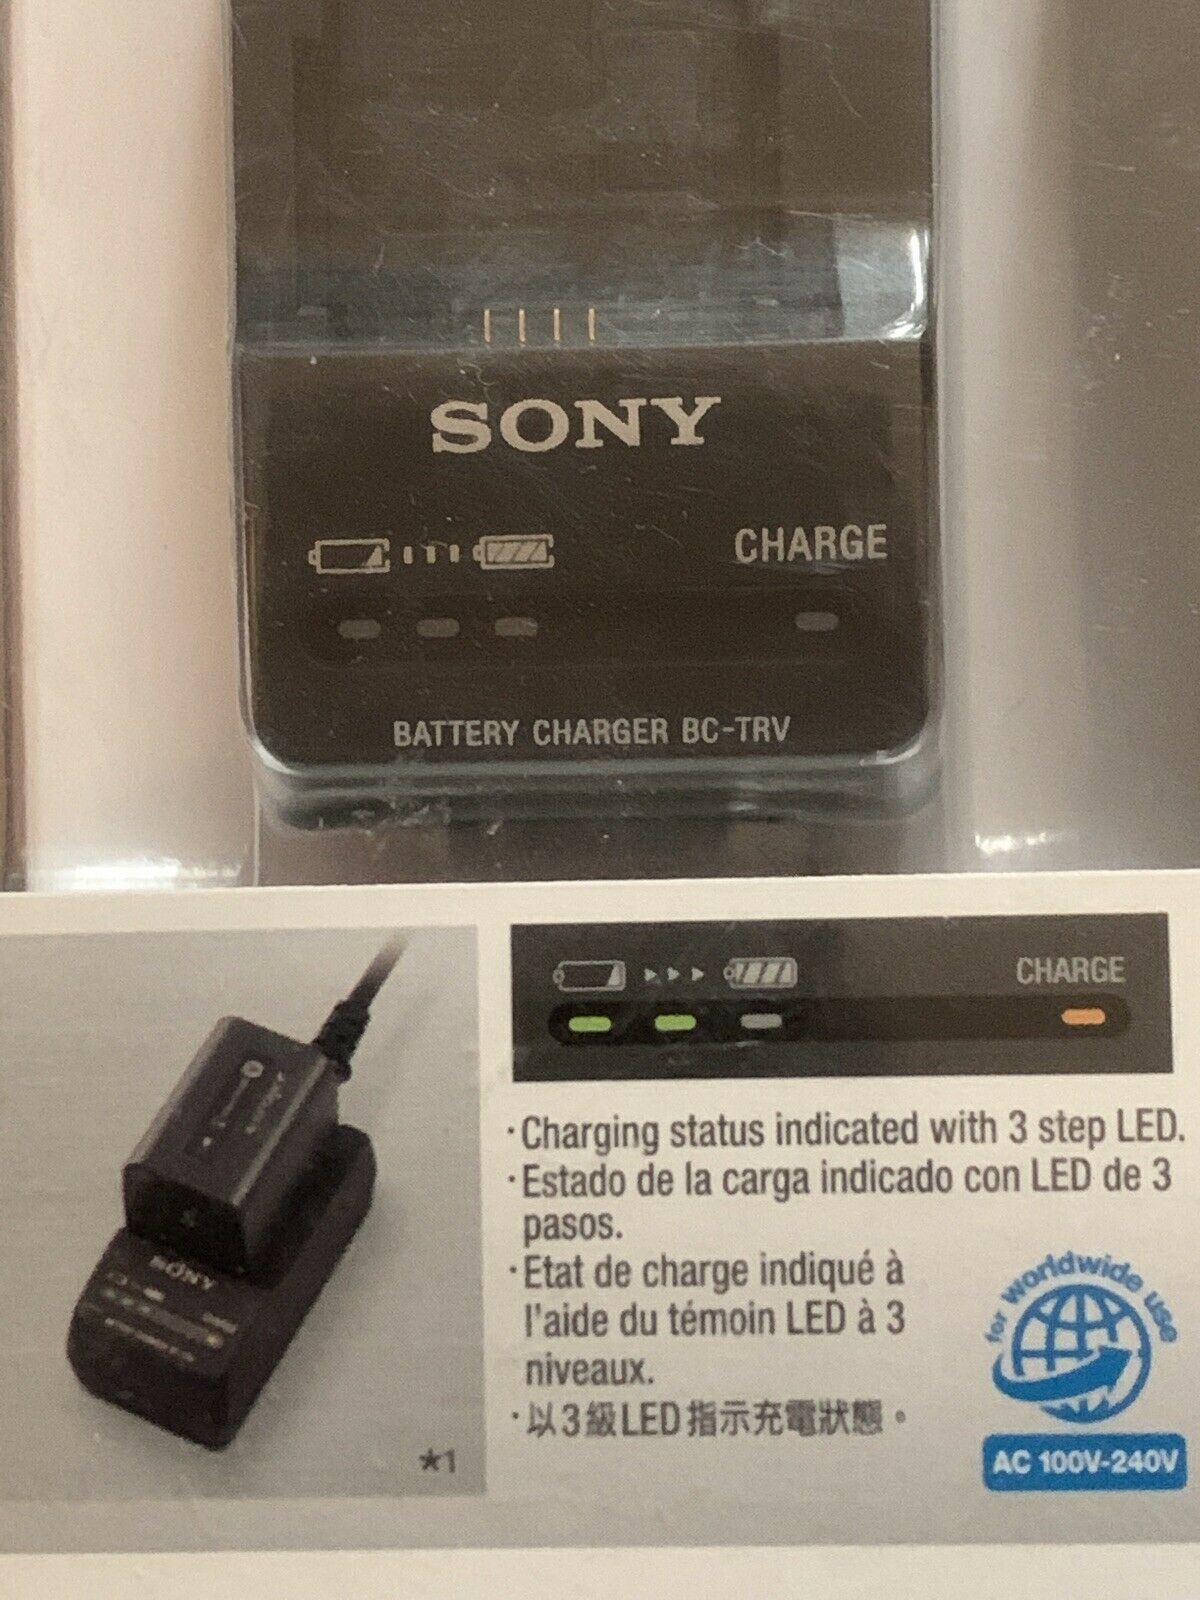 *New & Sealed* Sony BC-TRV Battery Charger For CyberShot, Handycam